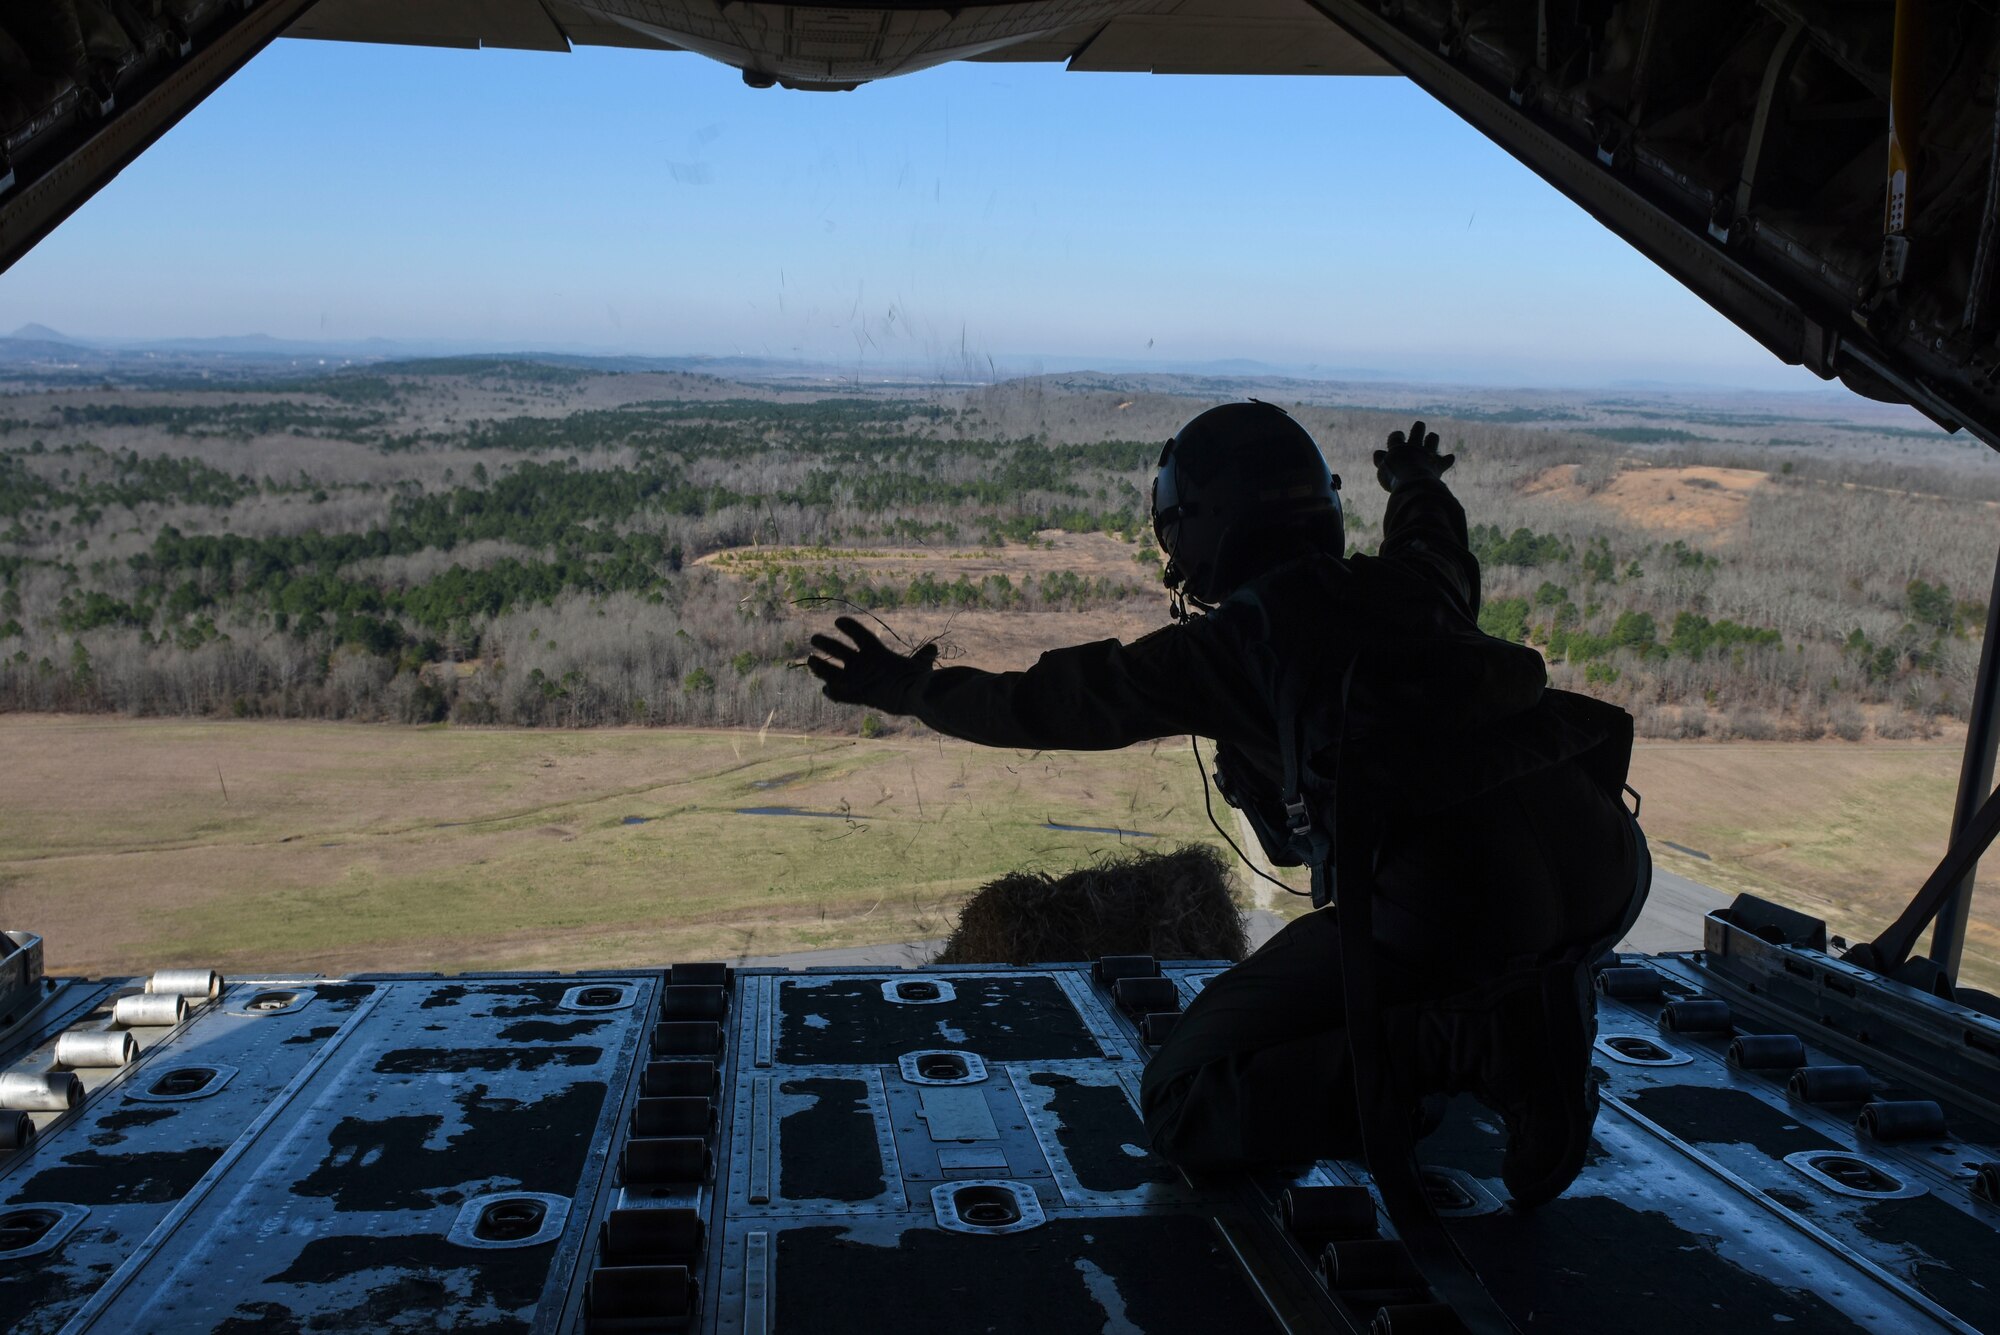 An Airman flies in the back of an aircraft and drops a hay bale during a training event